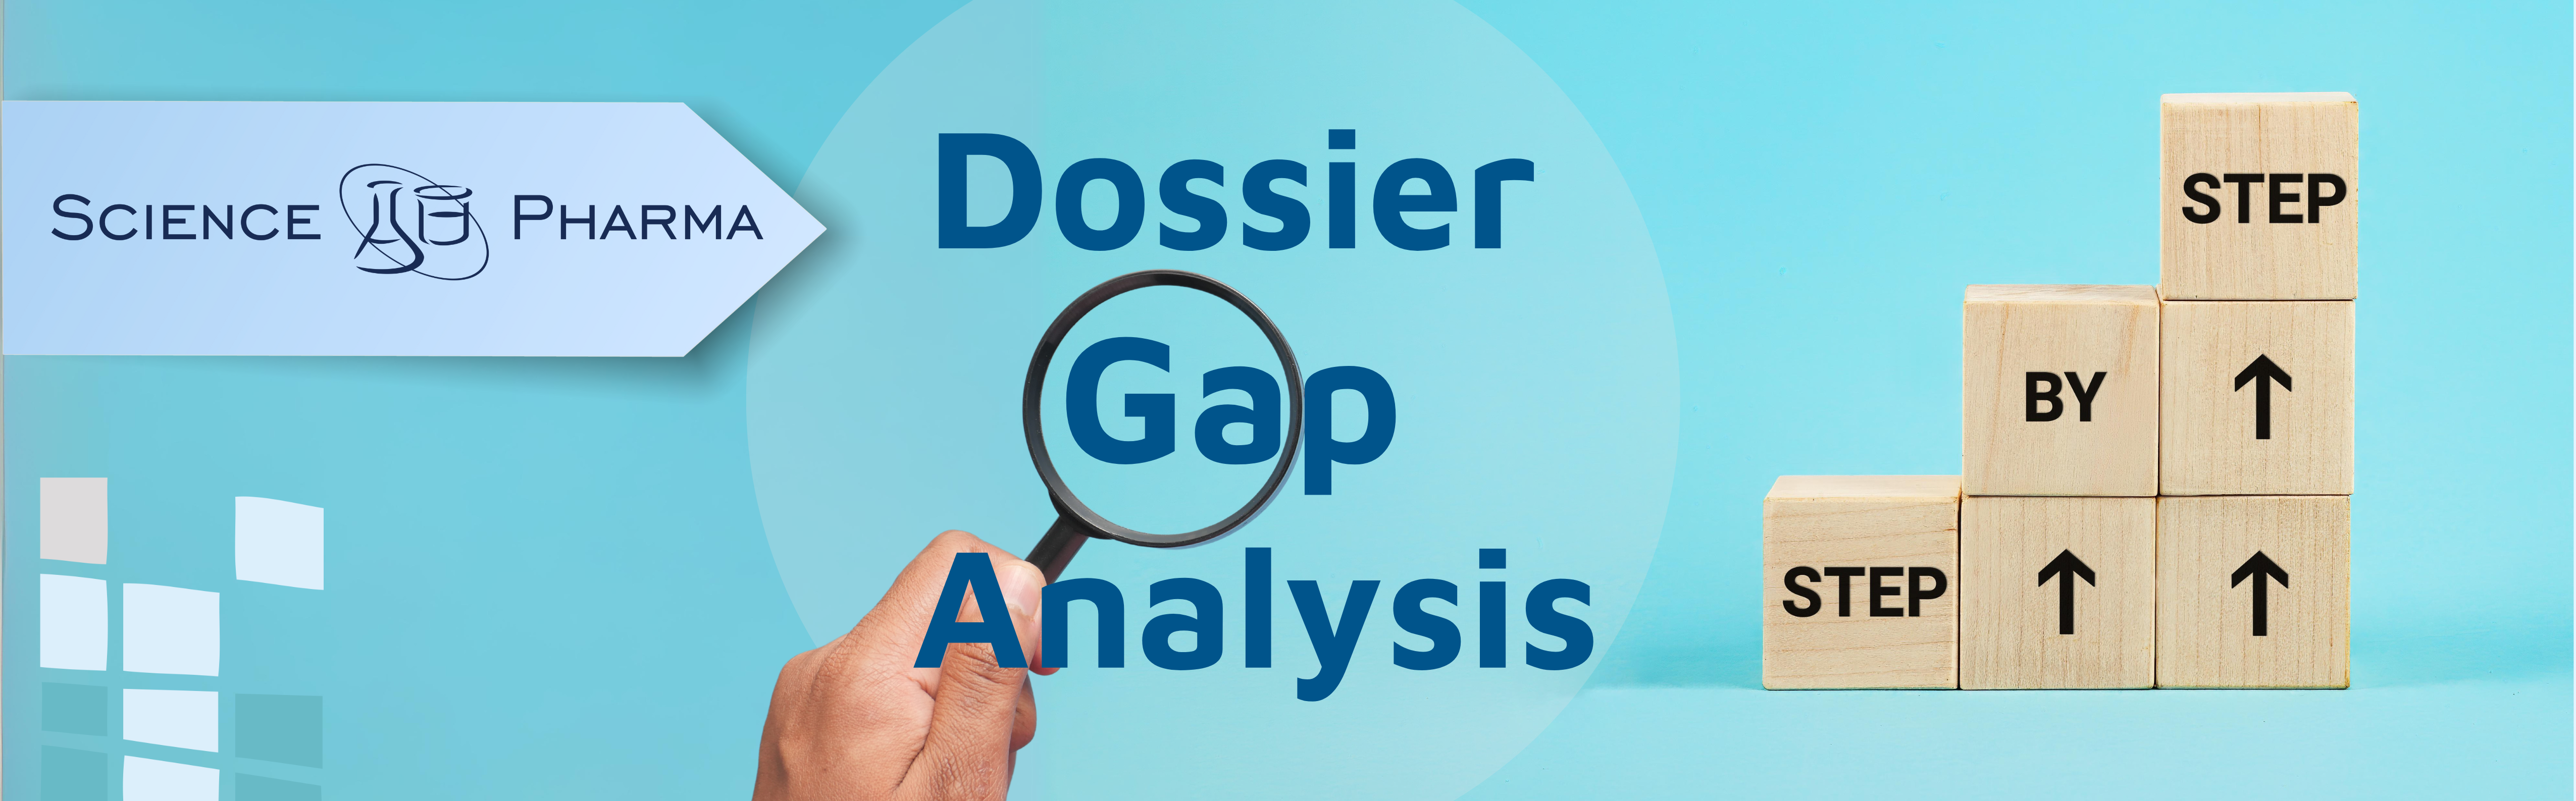 Image of the text 'Dossier Gap Analysis' magnified under a magnifying glass, with step-by-step blocks arranged below. The magnifying glass highlights the focus on analyzing gaps in a registration dossier.